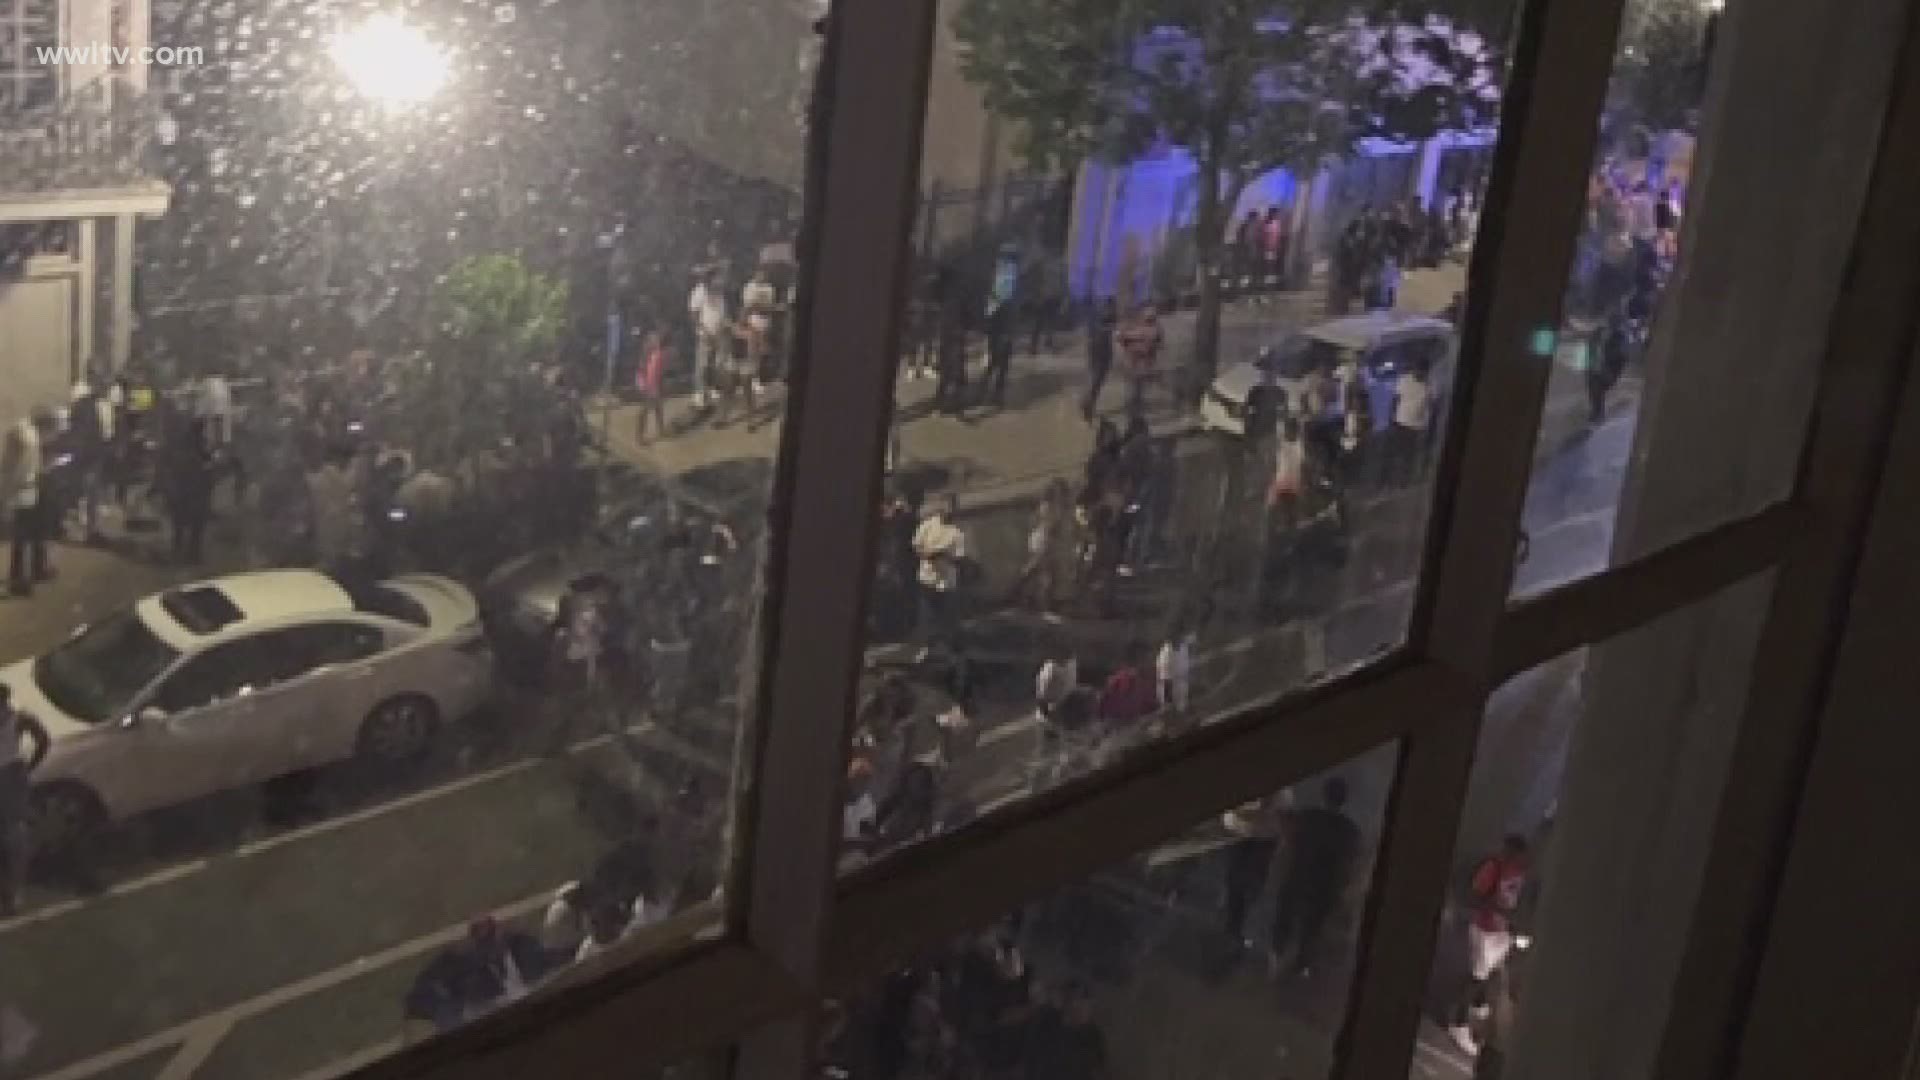 Cellphone video showed a large crowd gathering outside 808 Baronne Street in New Orleans on Friday night around ten.